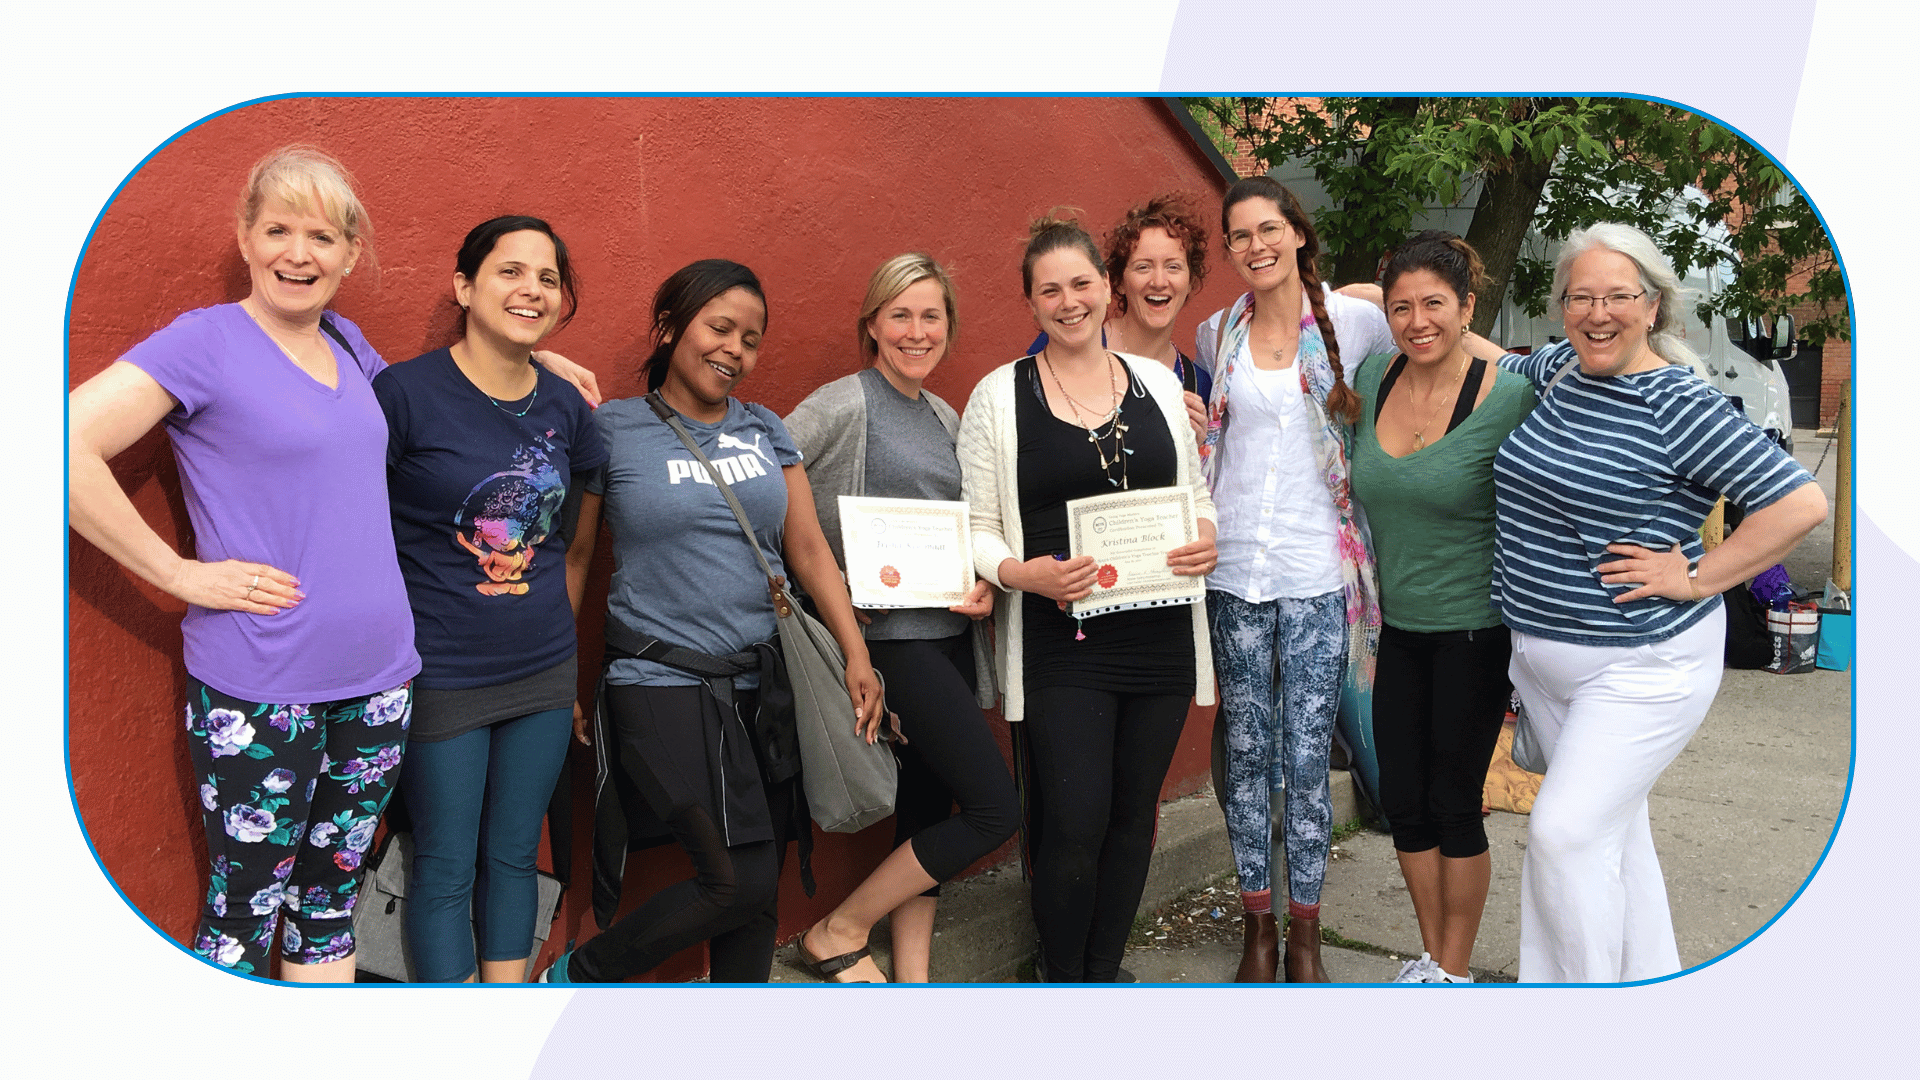 A group of 9 people stand smiling in front of a umber wall with 2 people holding graduation certificates for the kids yoga teacher training